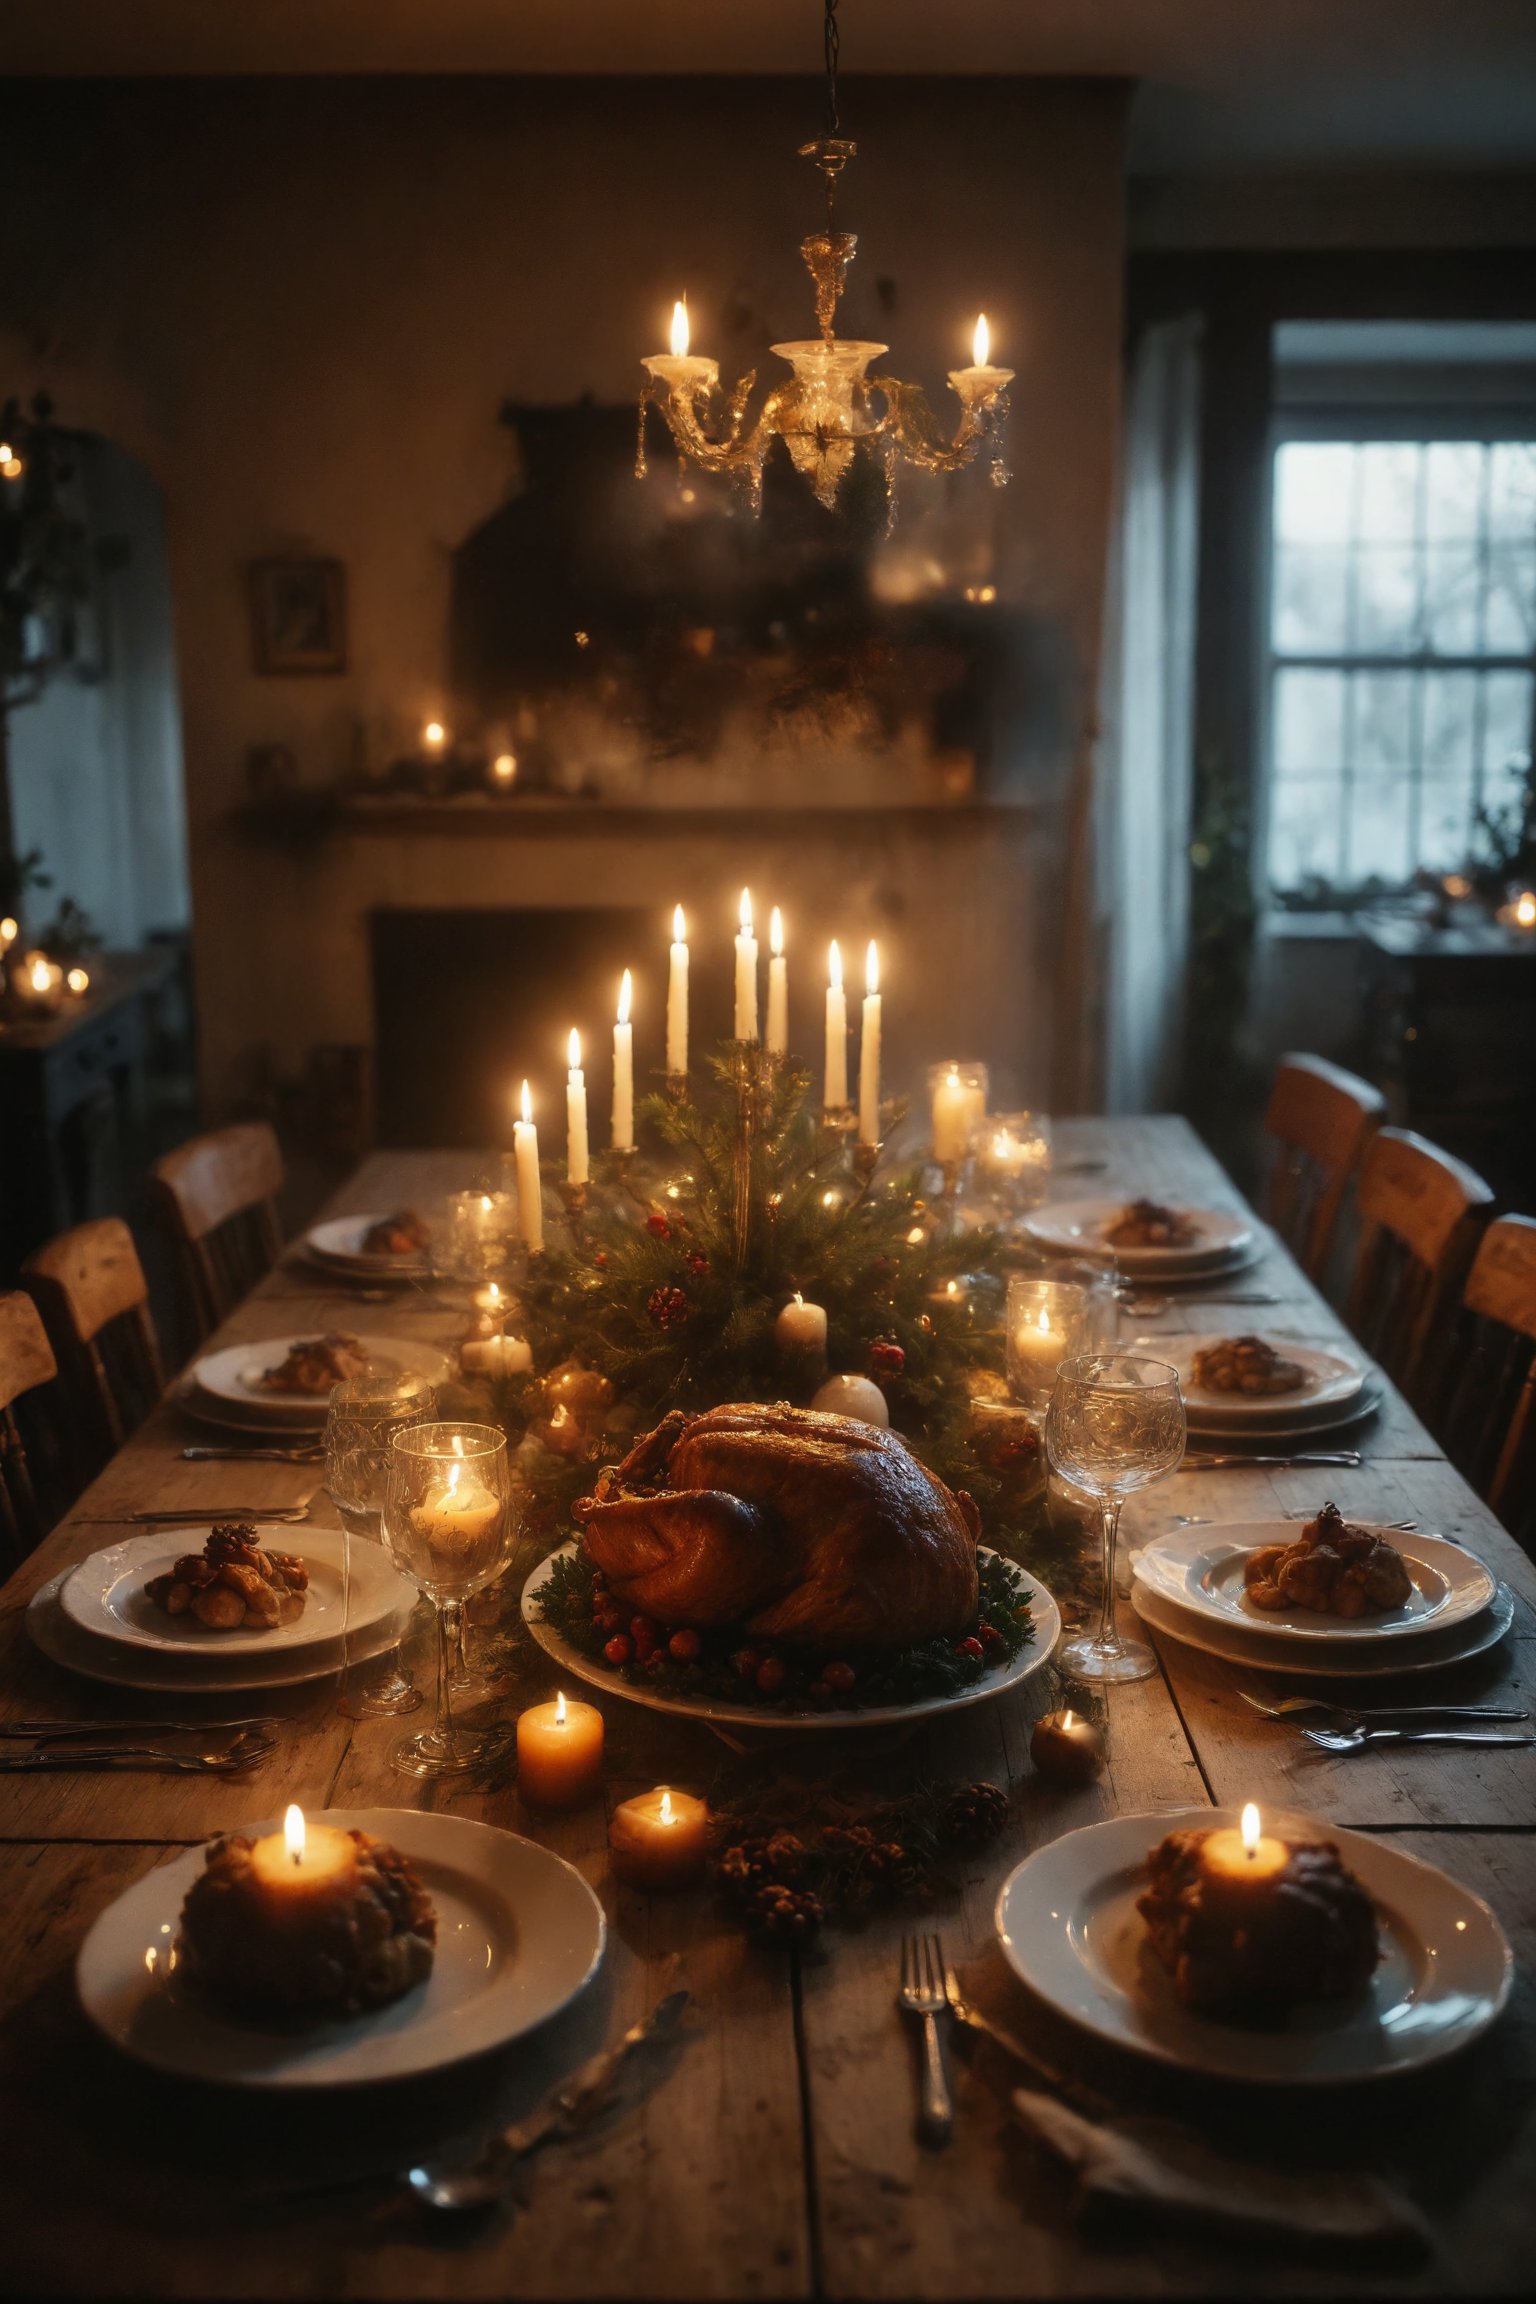 A festively decorated table with Christmas dinner and lit candles.